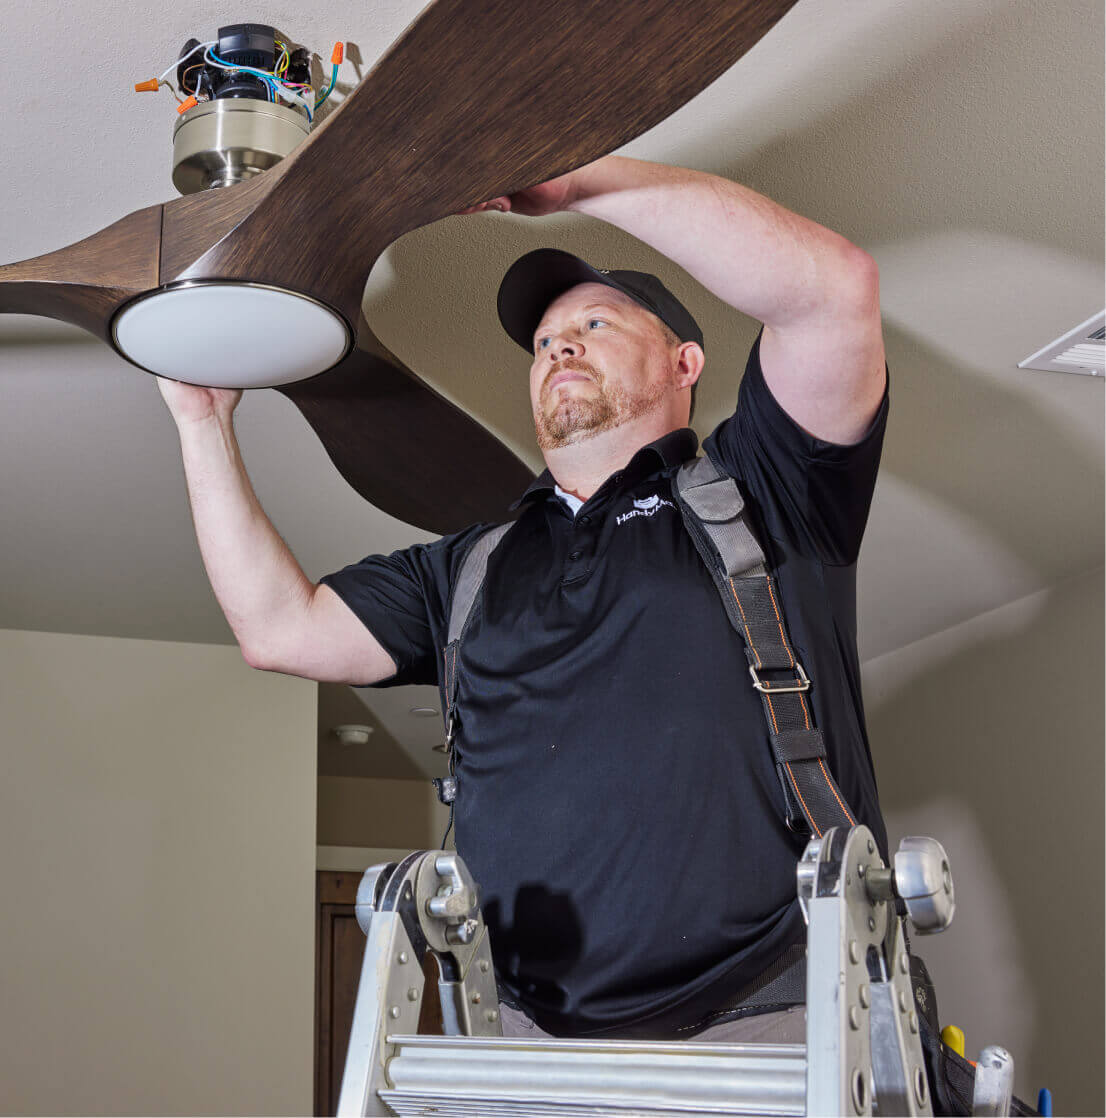 Tailored, easy and affordable insurance for handyman business in North Dakota 